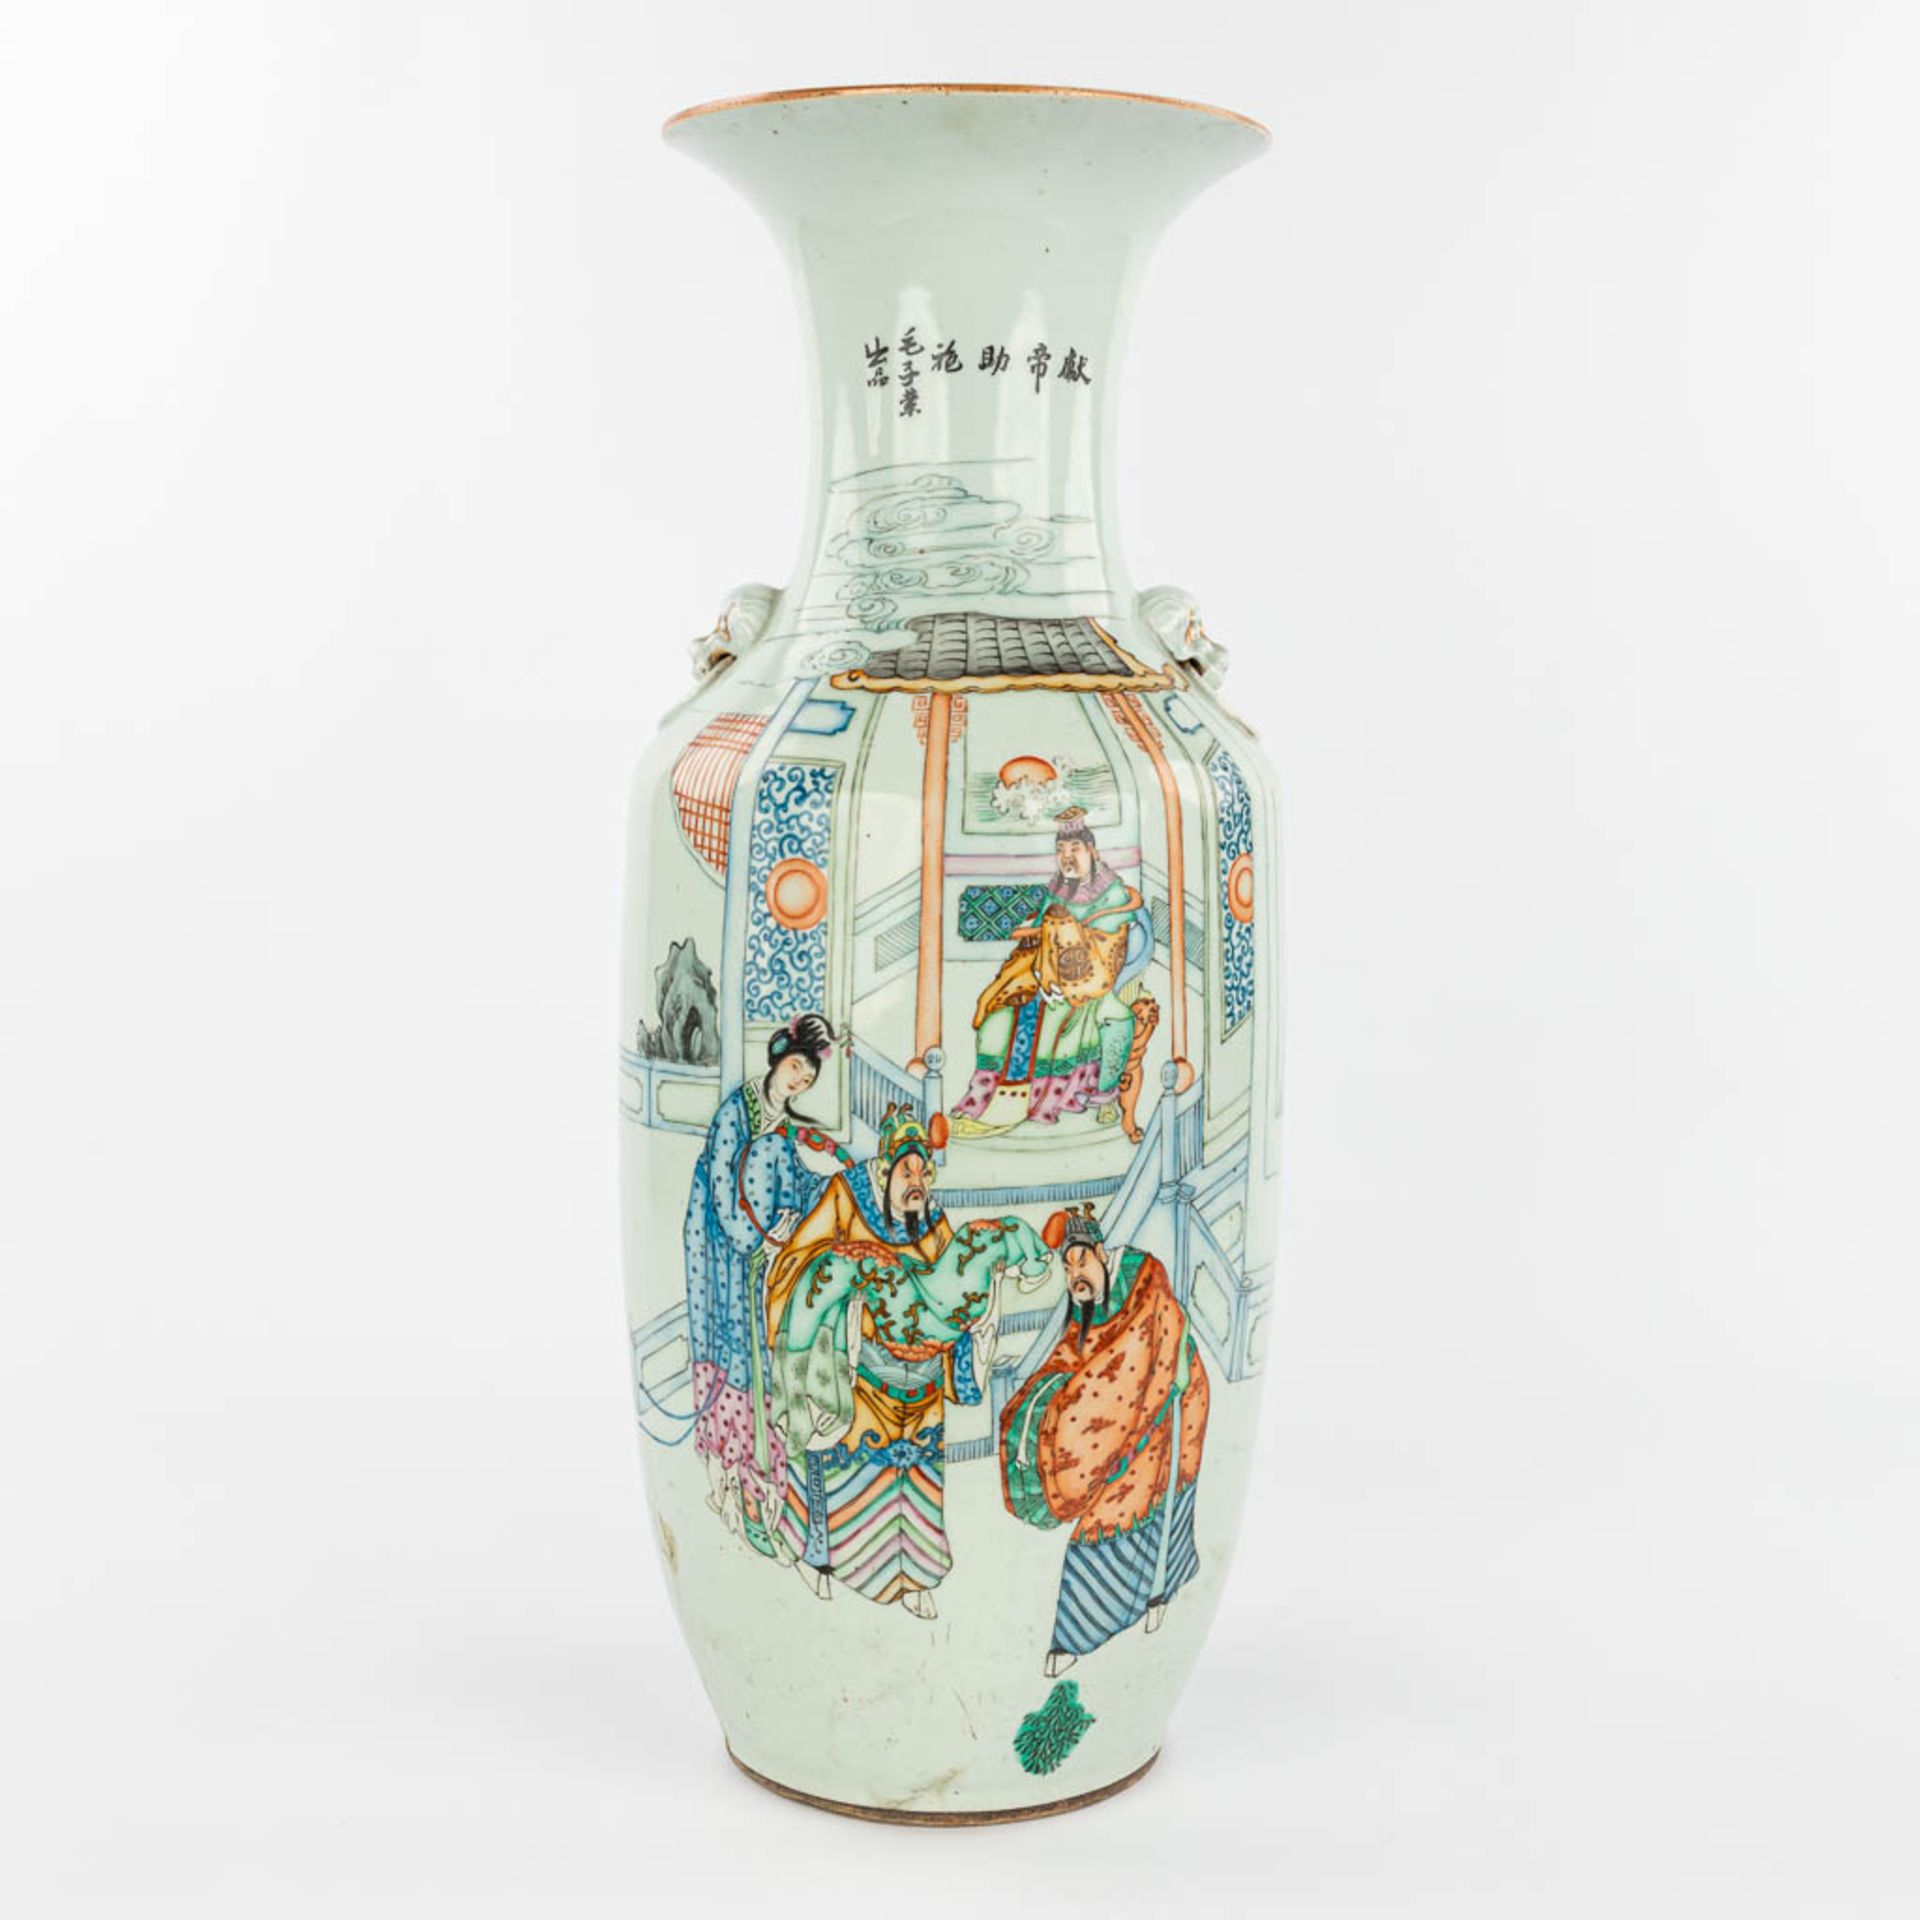 A Chinese vase made of porcelain and decorated with a temple scne and calligraphic texts. (H:57cm)